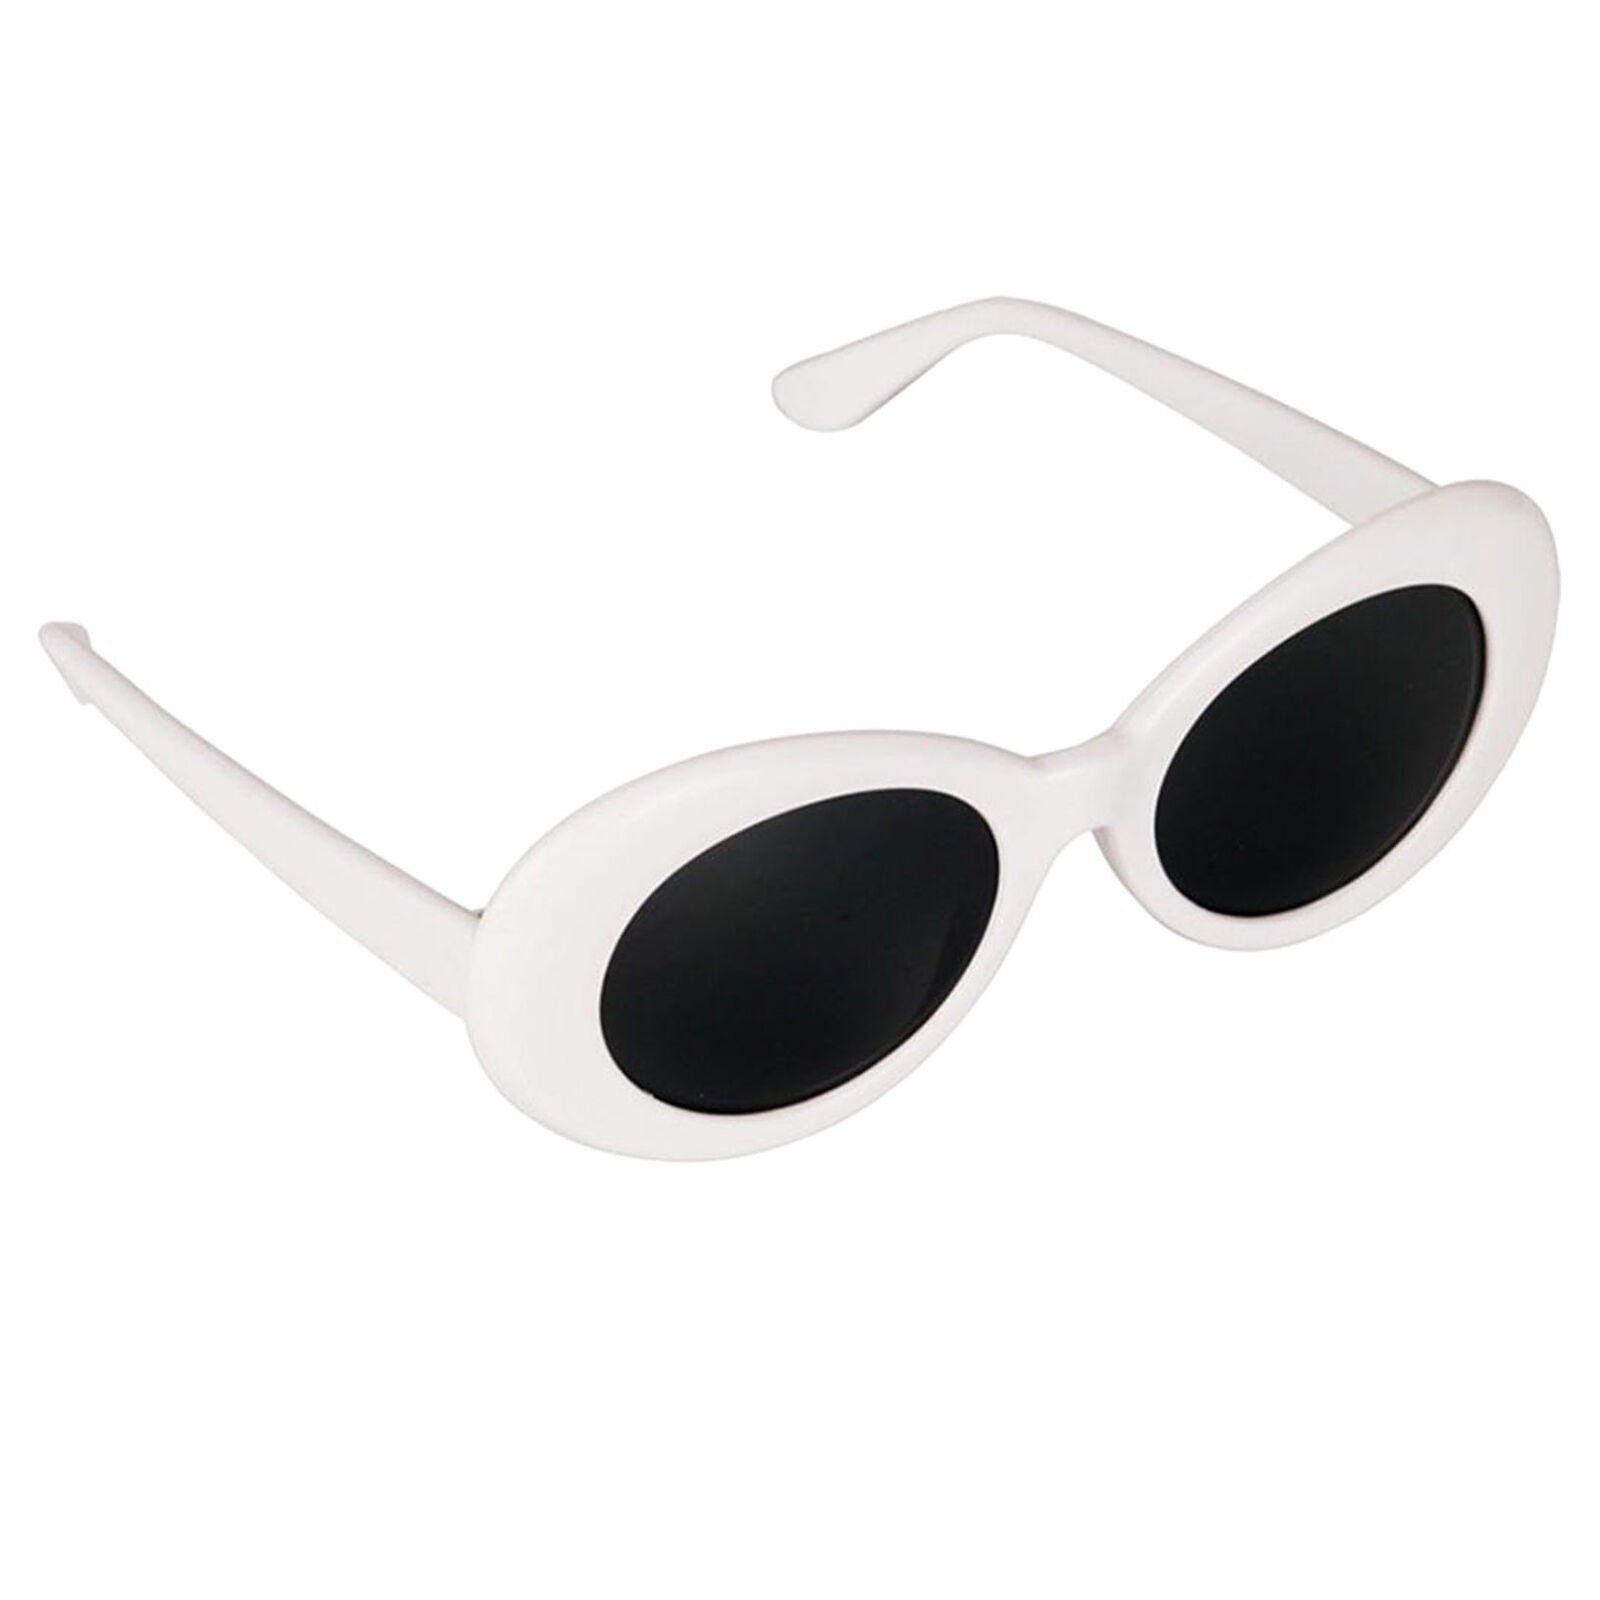 Clout Goggles Glasses Mod Thick Framed Sunglasses Unisex